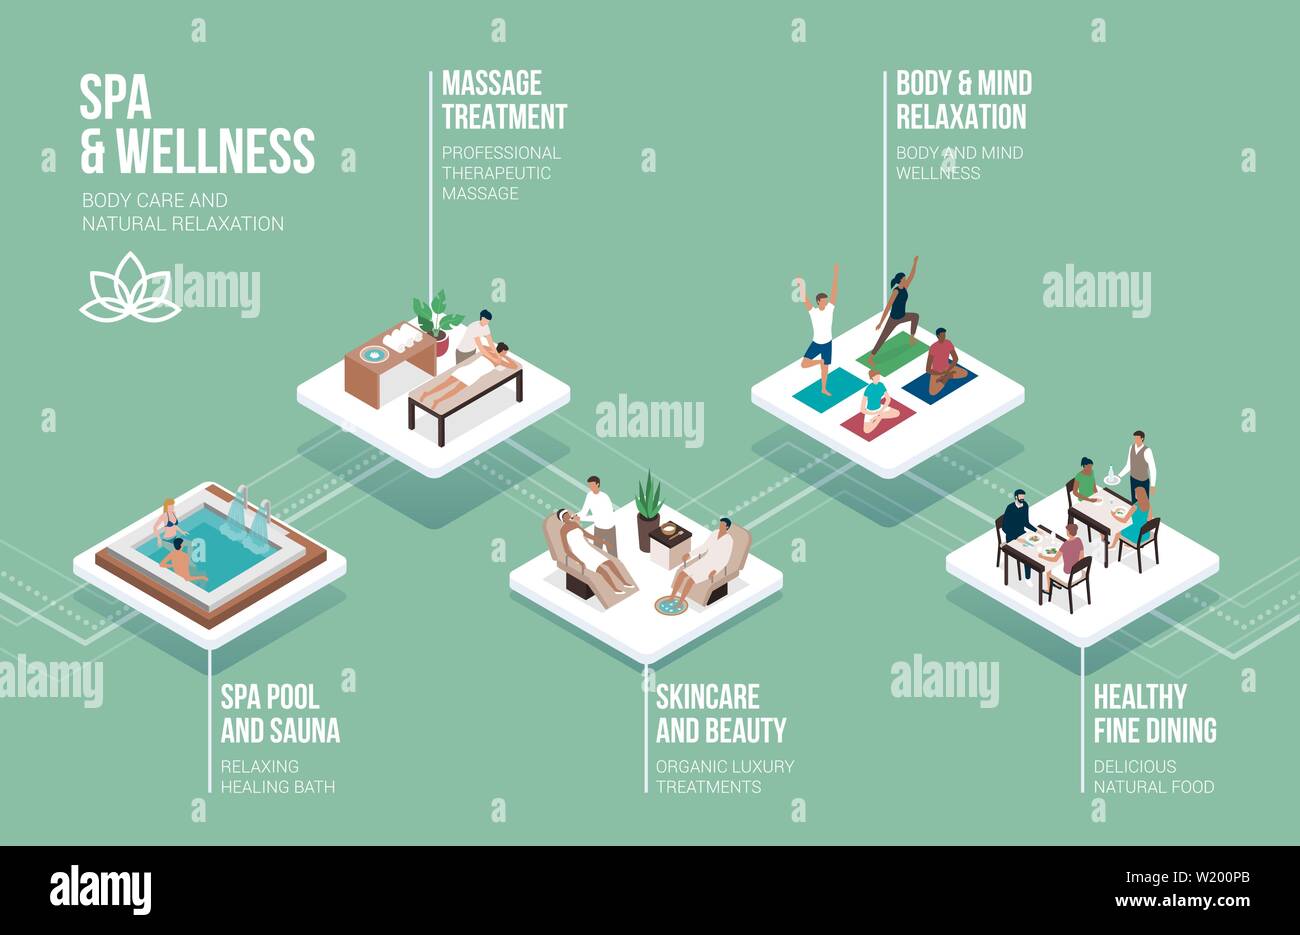 Wellness and beauty luxury spa treatments: pool, massage, beauty treatments, yoga and fine dining, isometric infographic Stock Vector